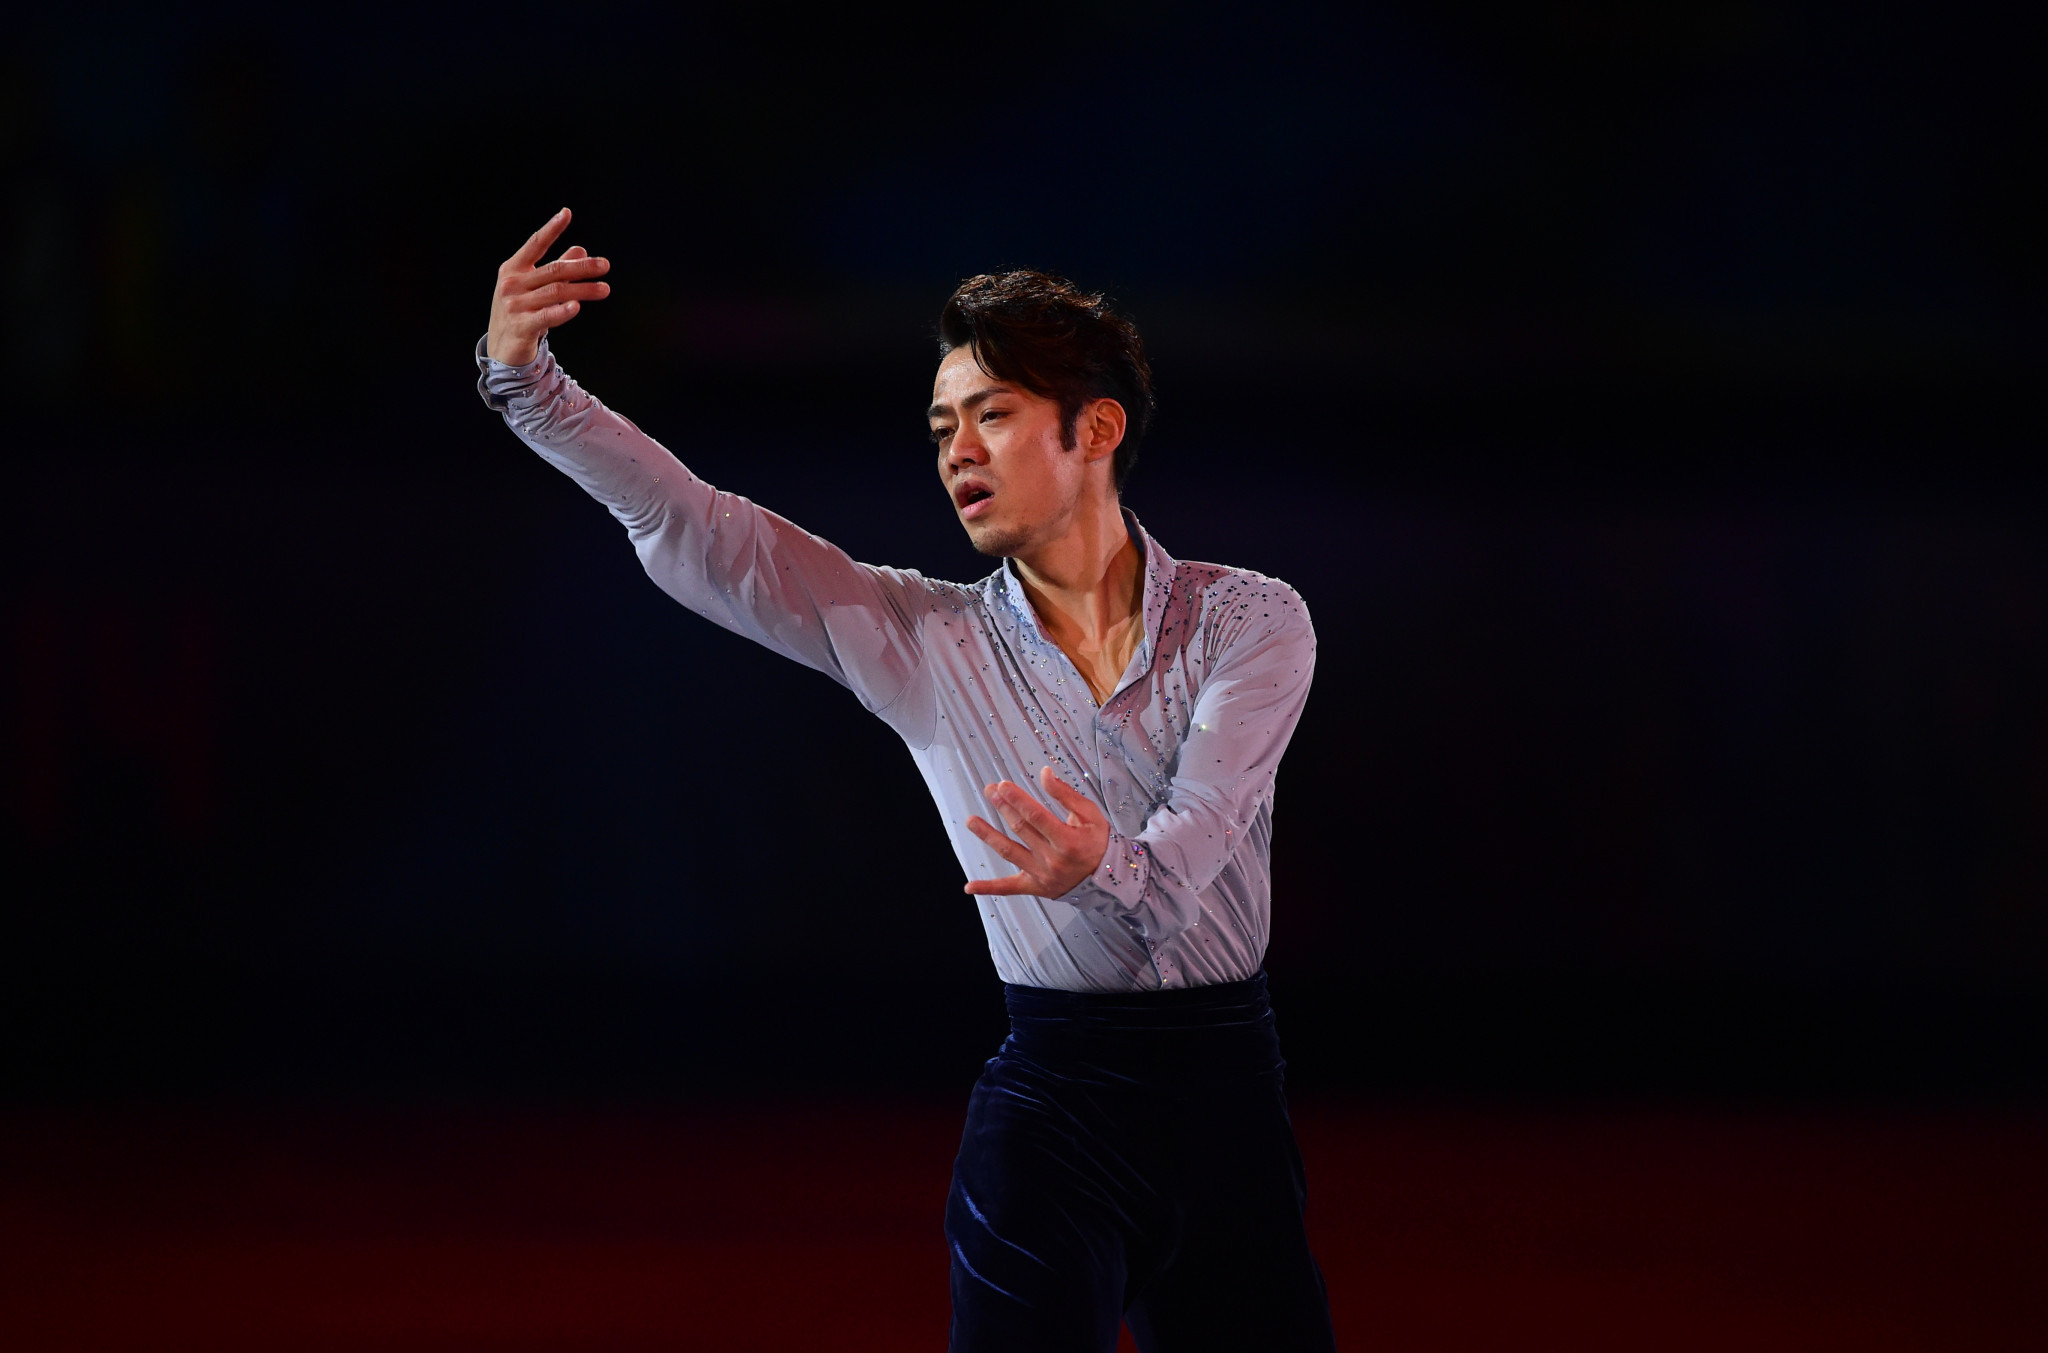 Former world champion comes out of retirement to return to figure skating